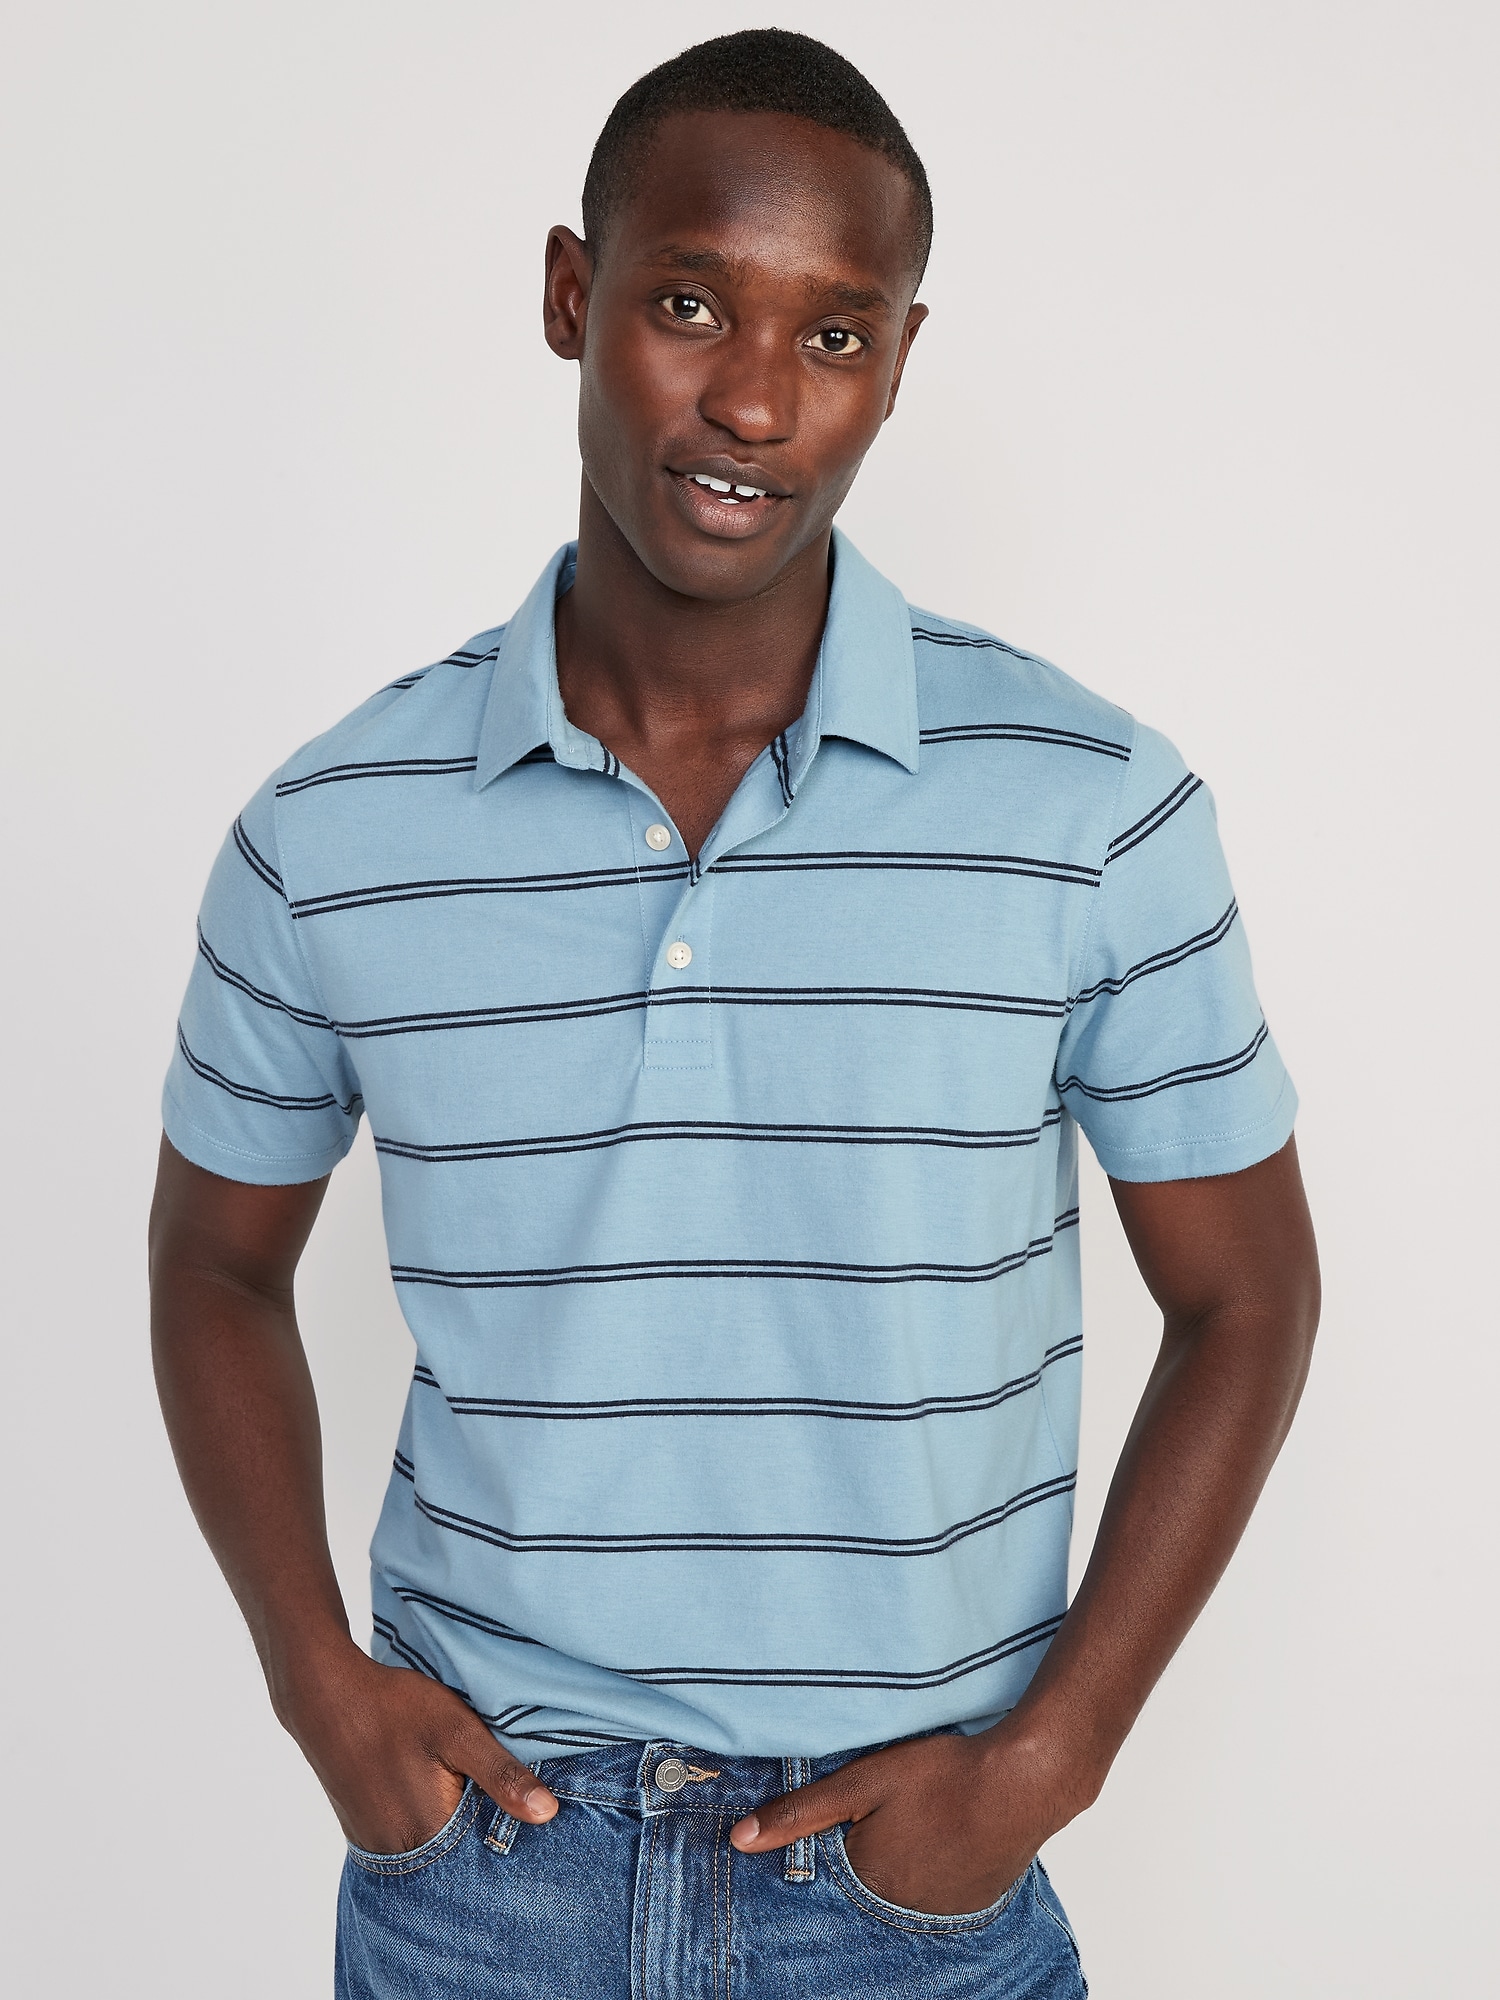 Old Navy Classic Fit Striped Jersey Polo for Men blue. 1